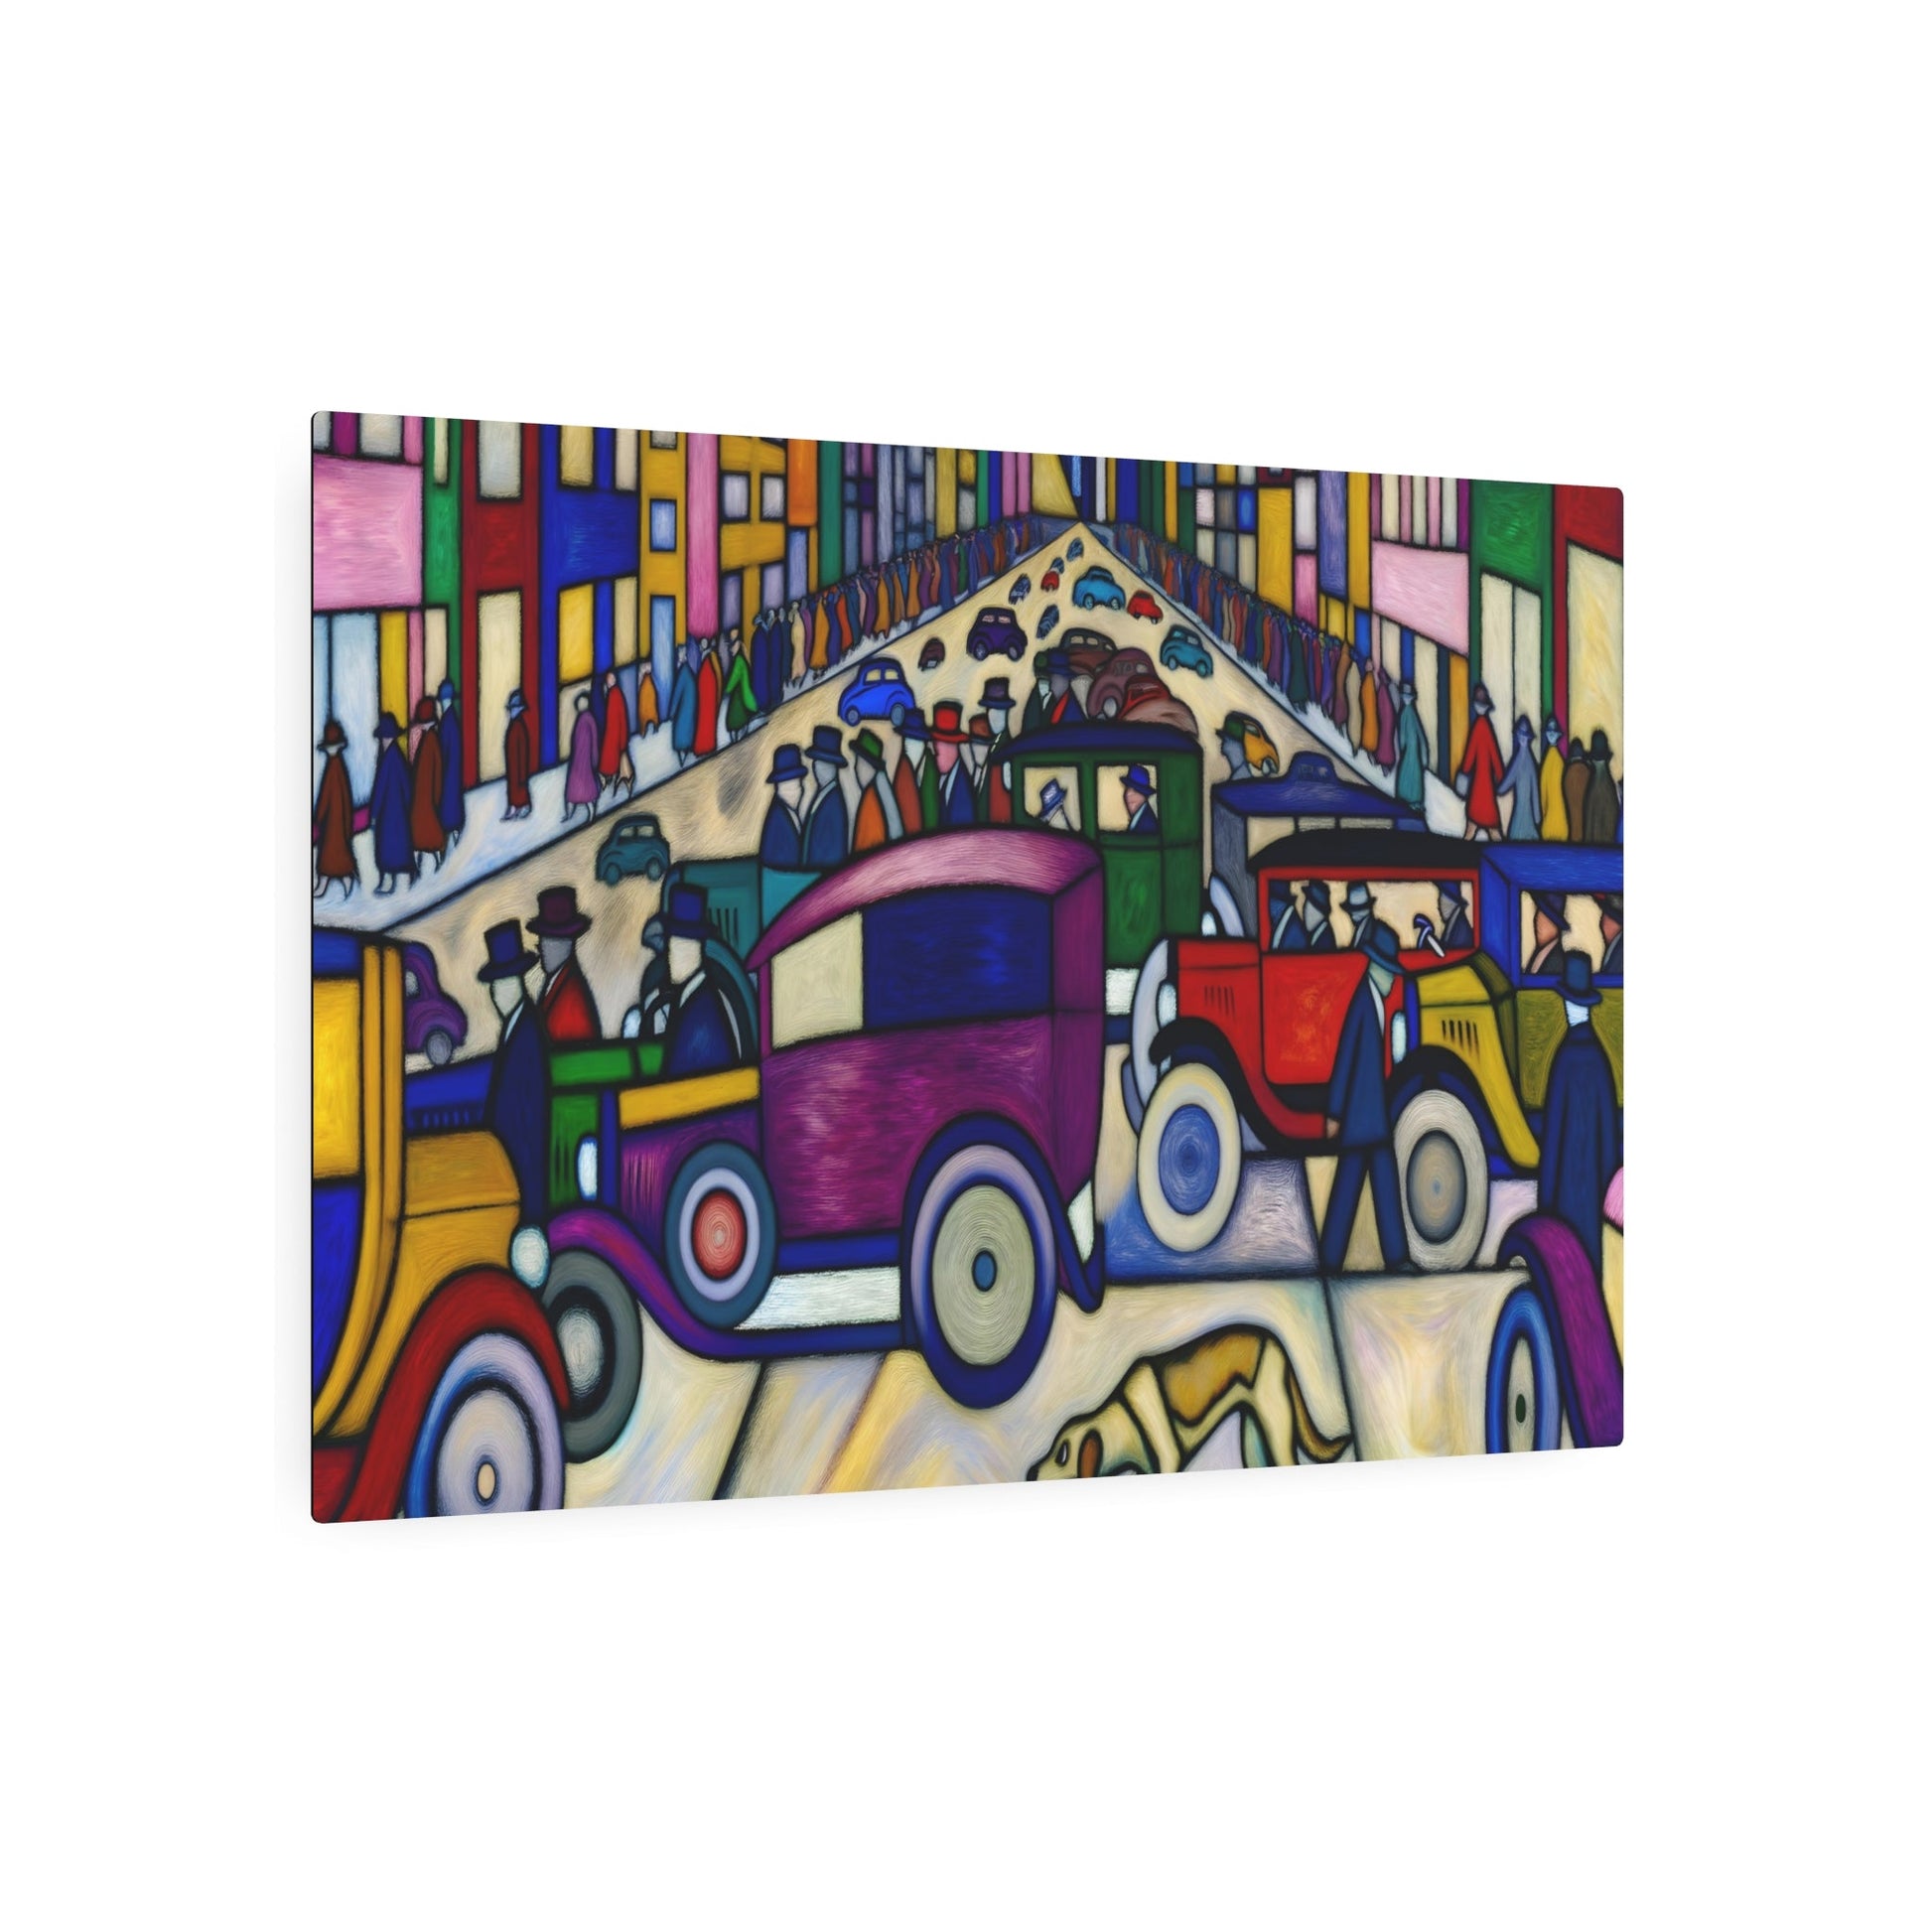 Metal Poster Art | "Vibrant Expressionist Western Art Style - NYC Scene with Dog Navigating Bustling Streets - Colorful, Distorted Visuals Challeng - Metal Poster Art 36″ x 24″ (Horizontal) 0.12''